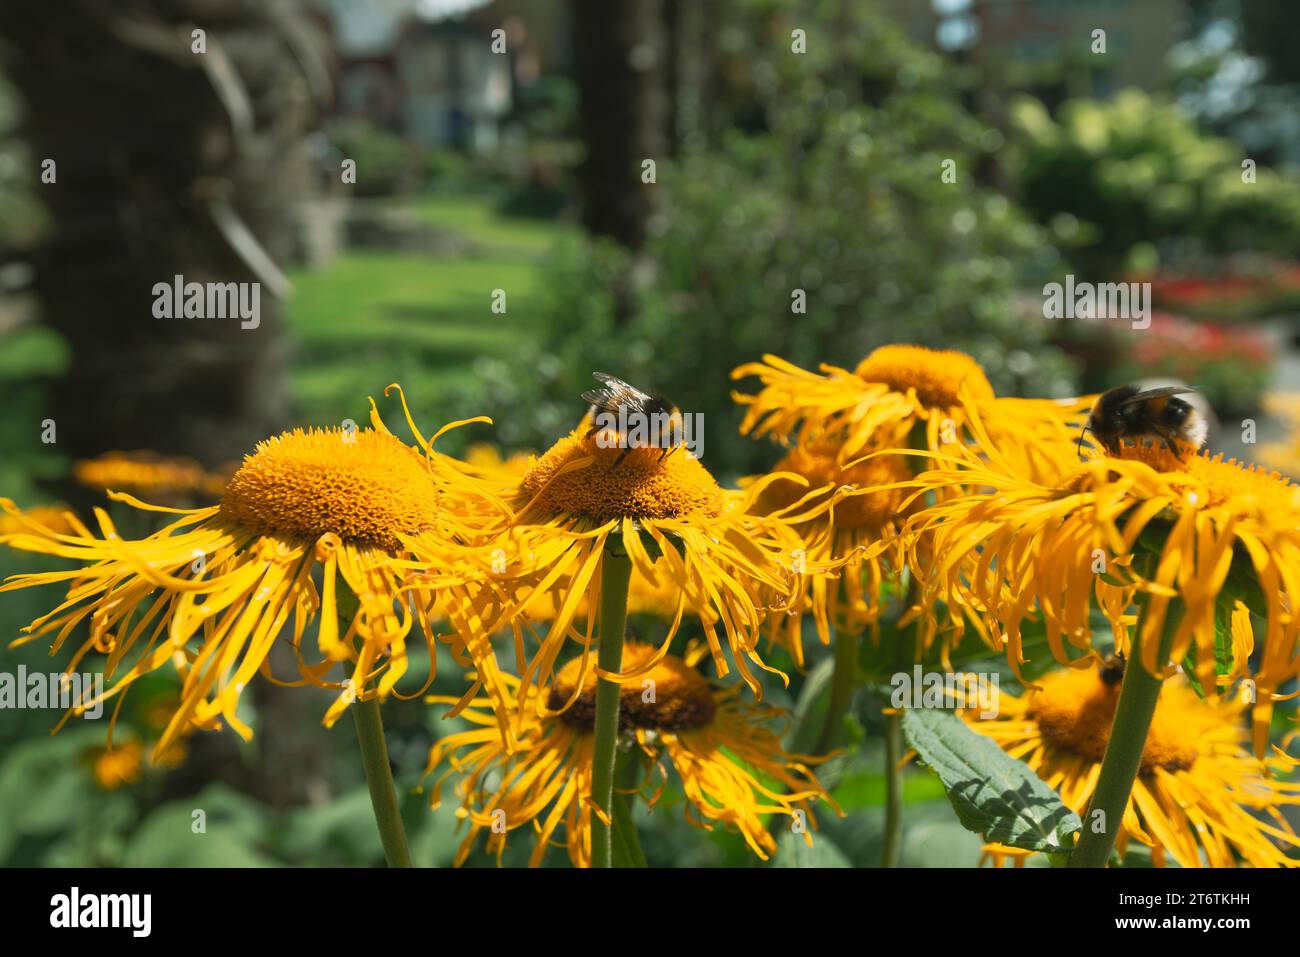 Bumble bees enjoy the nectar from the yellow flowers in the summer sunlight in North Wales UK Stock Photo